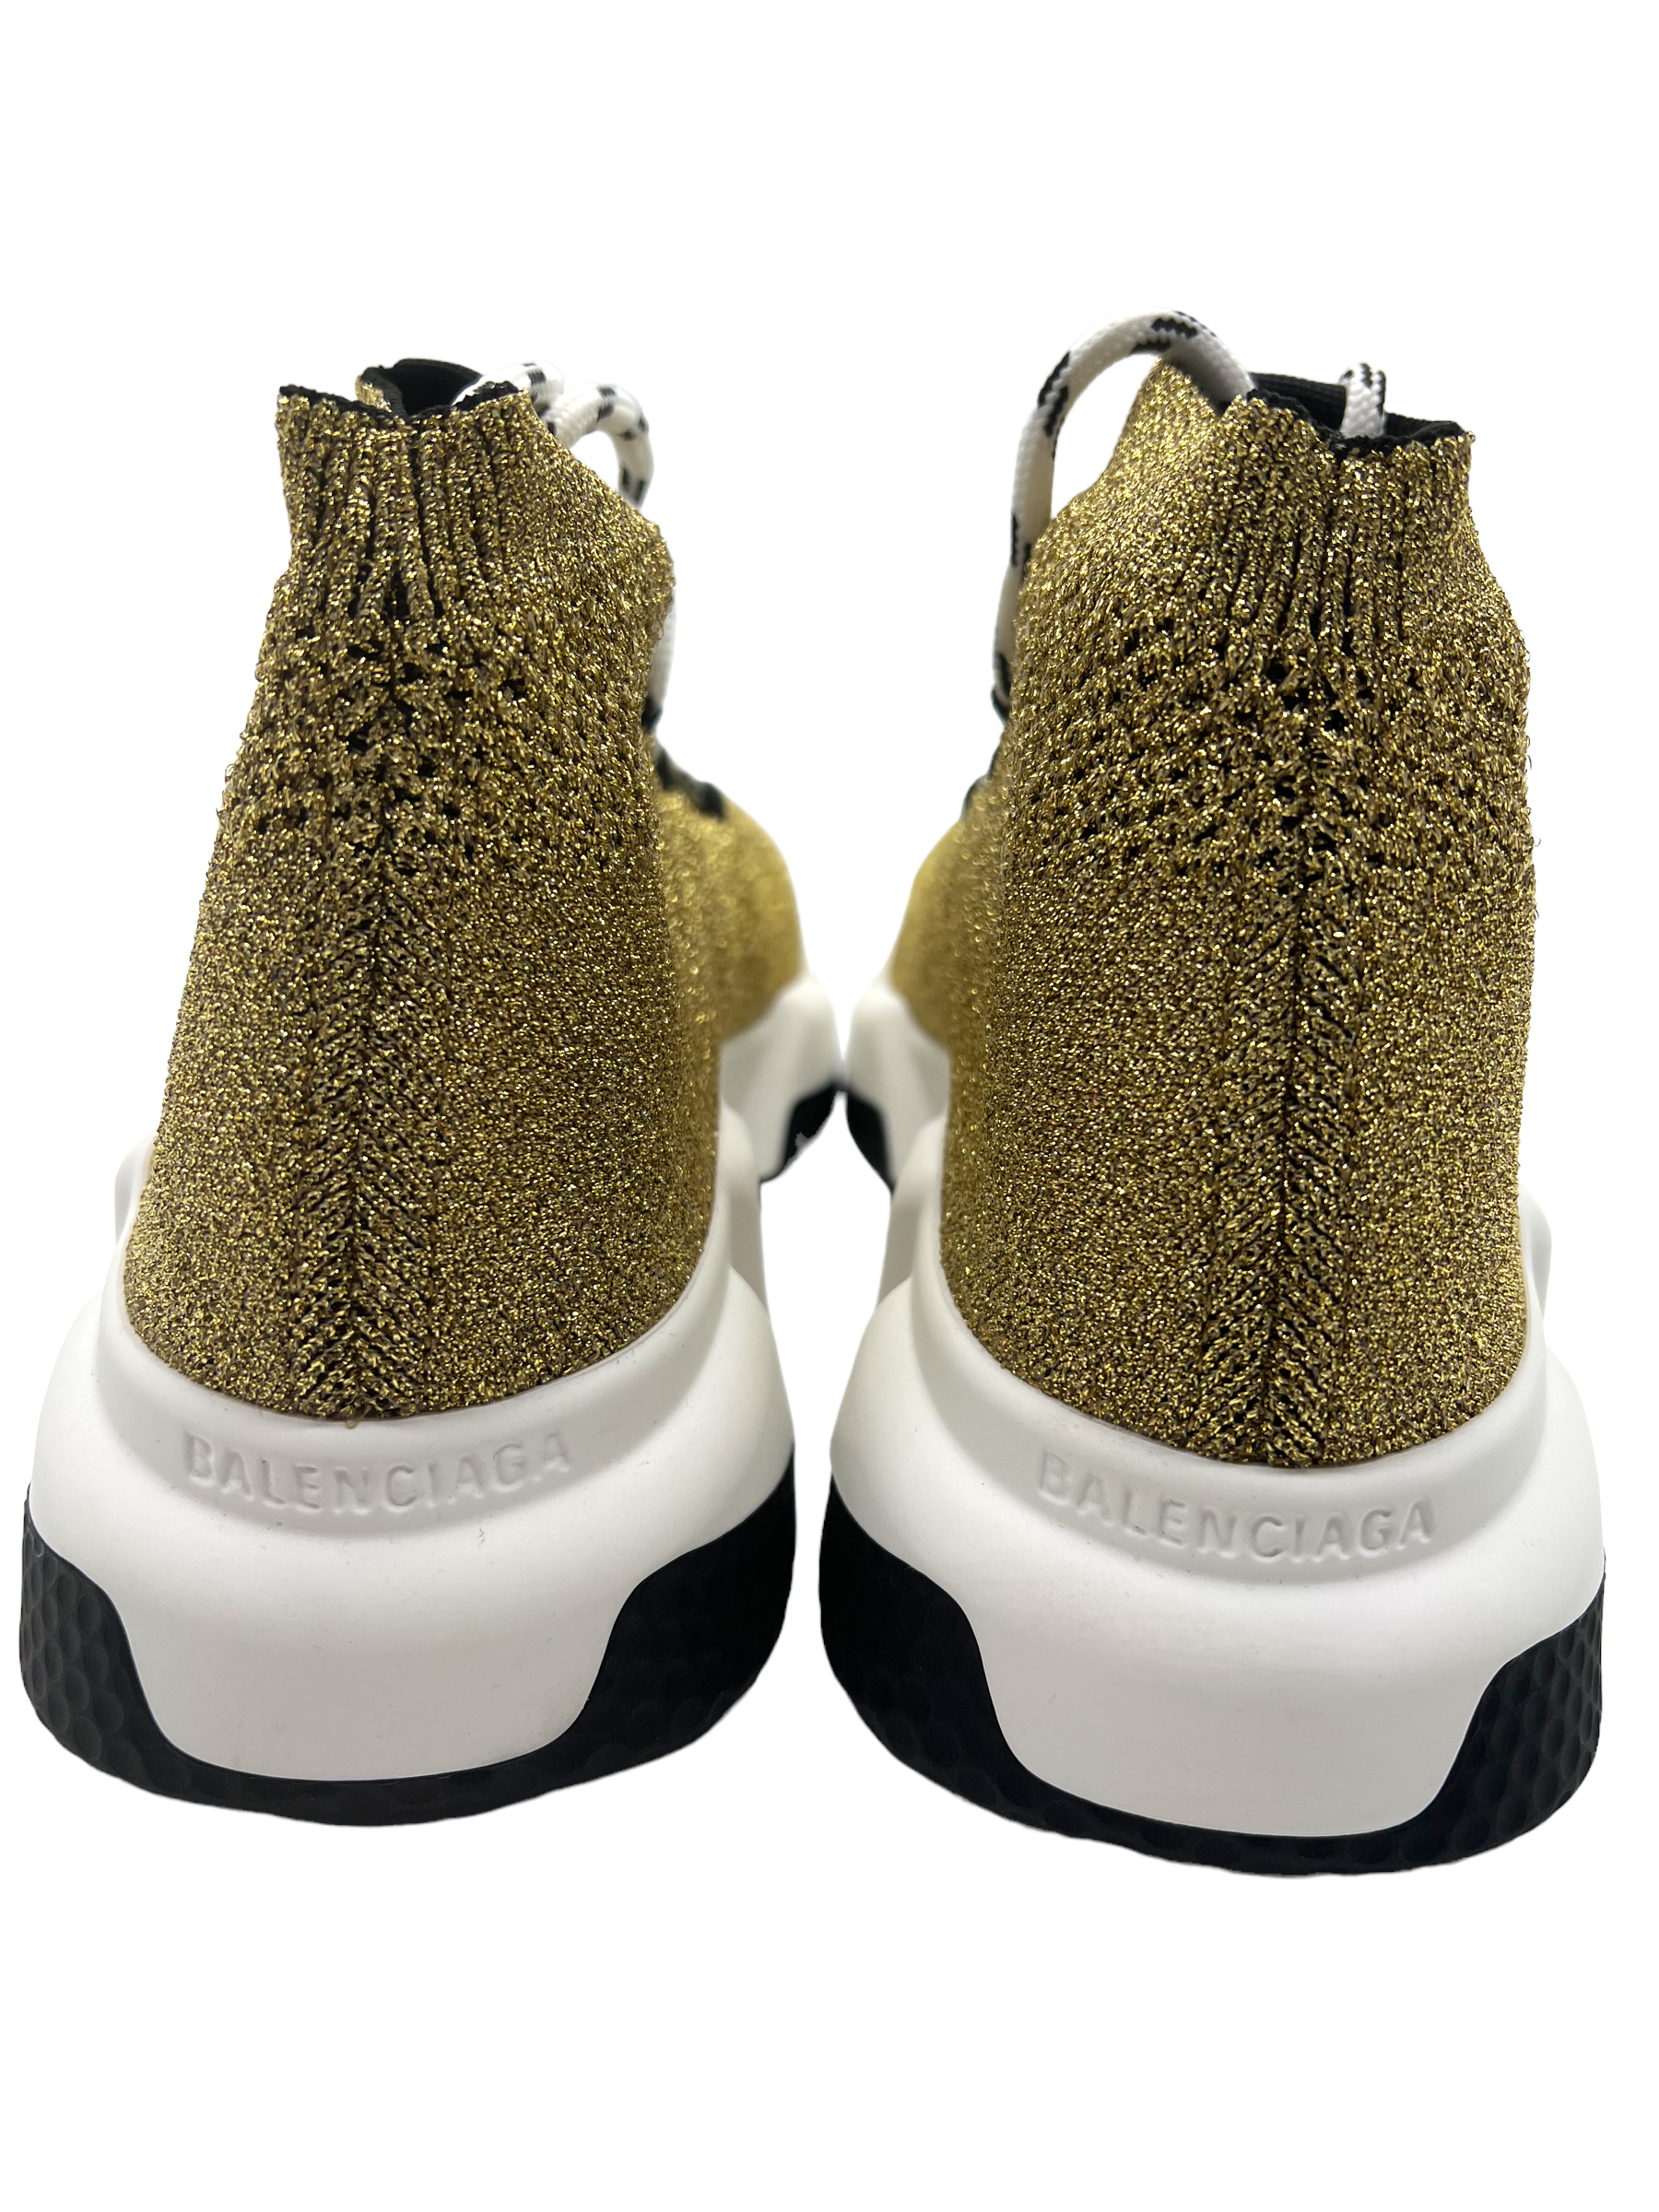 Balenciaga Brown Knit Fabric Speed Trainer Sneakers Size 37